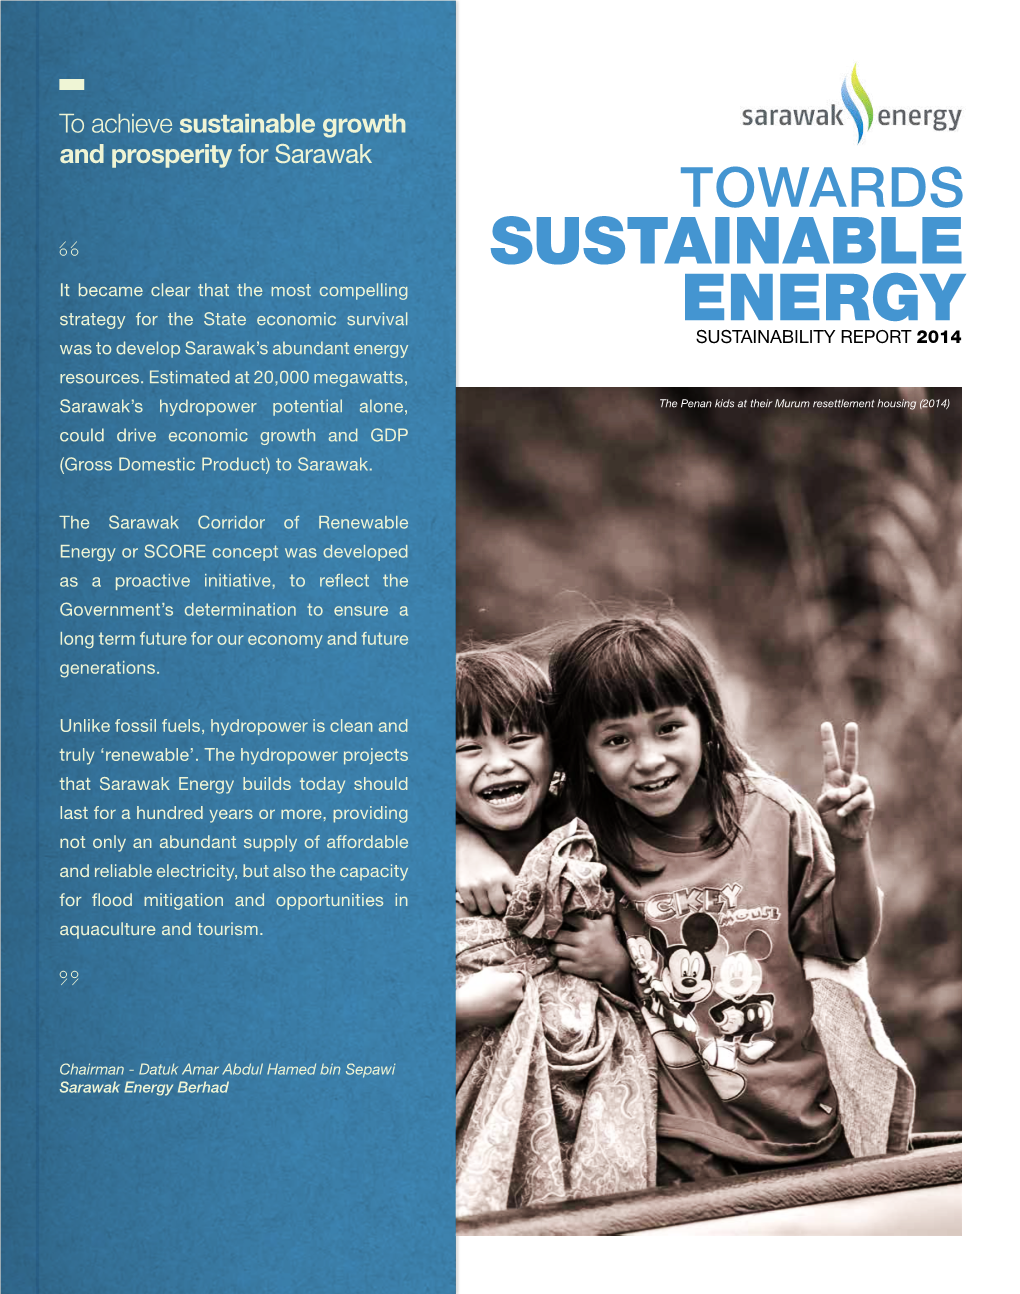 SUSTAINABILITY REPORT 2014 Strivewas to to Develop Create Sarawak’Spositive, Lasting Abundant Impact Energy — Socially,Resources